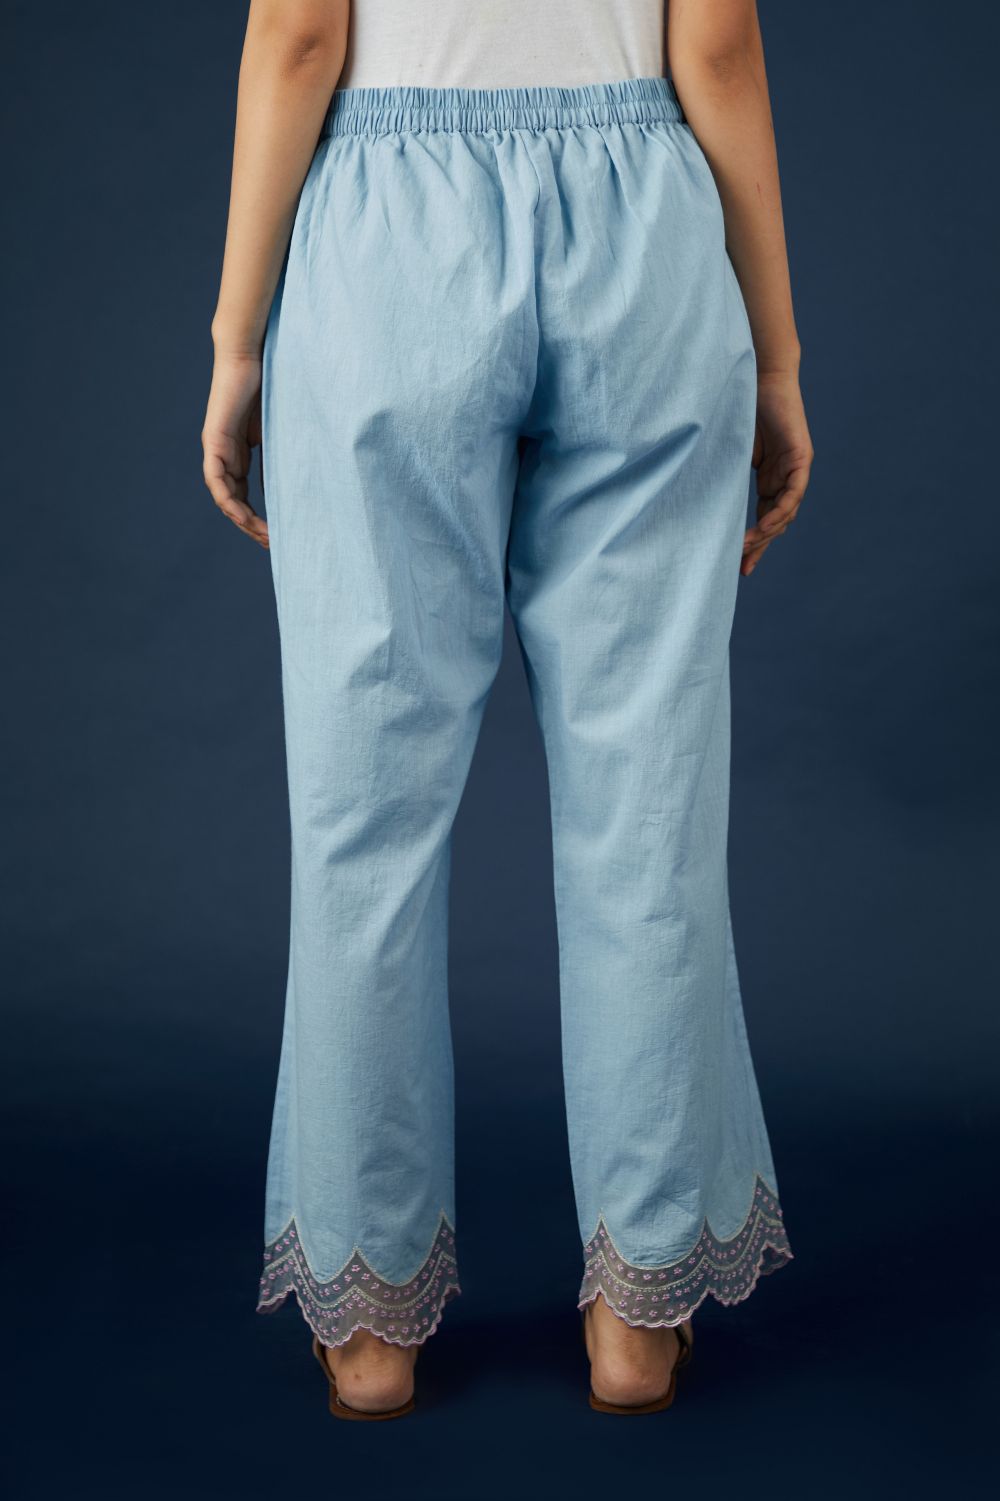 Blue straight pants with scalloped embroidery at hem. (Pants)